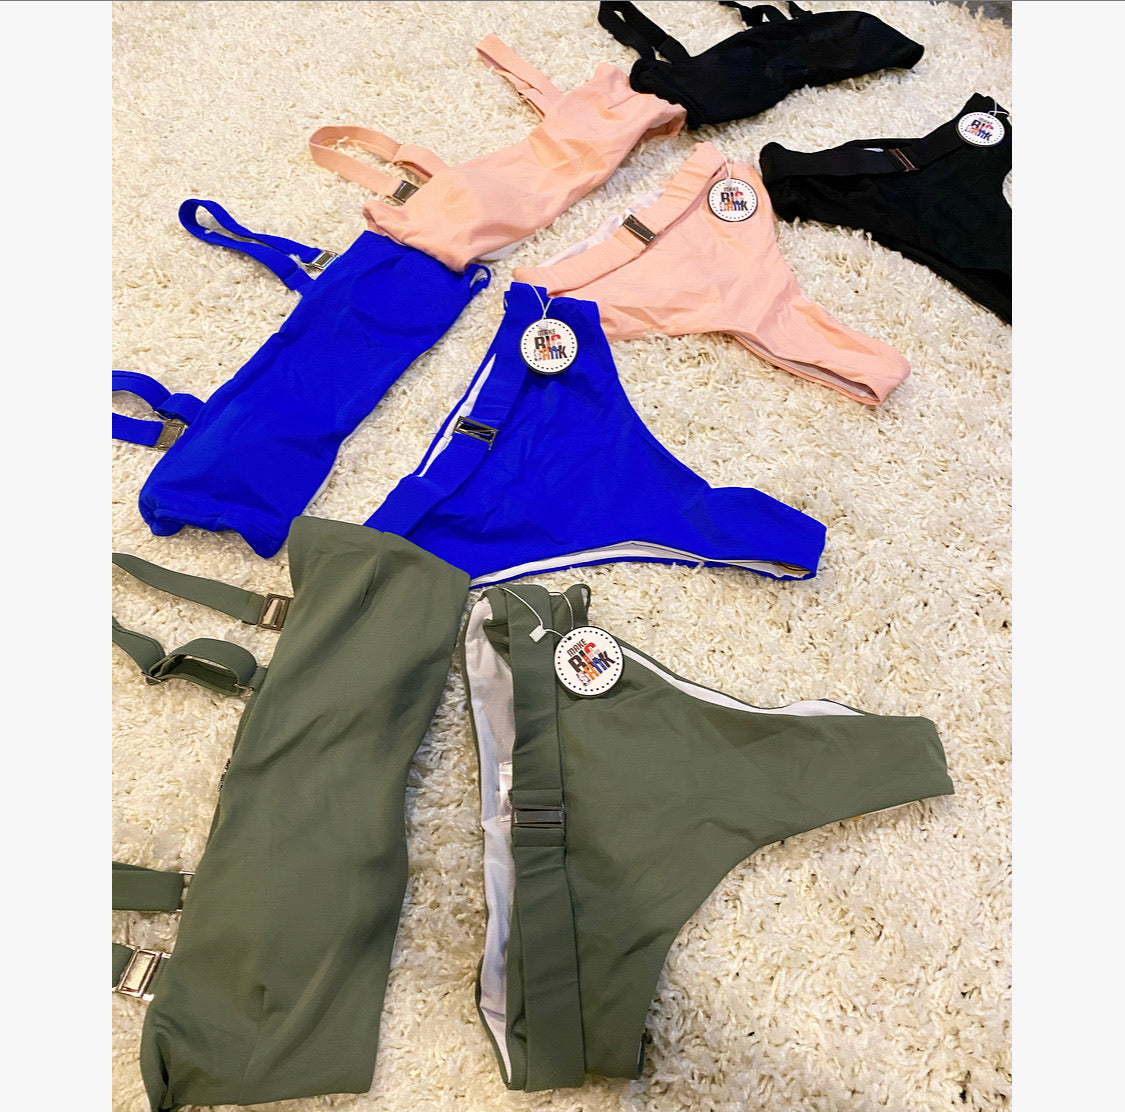 Buckle Swimsuits